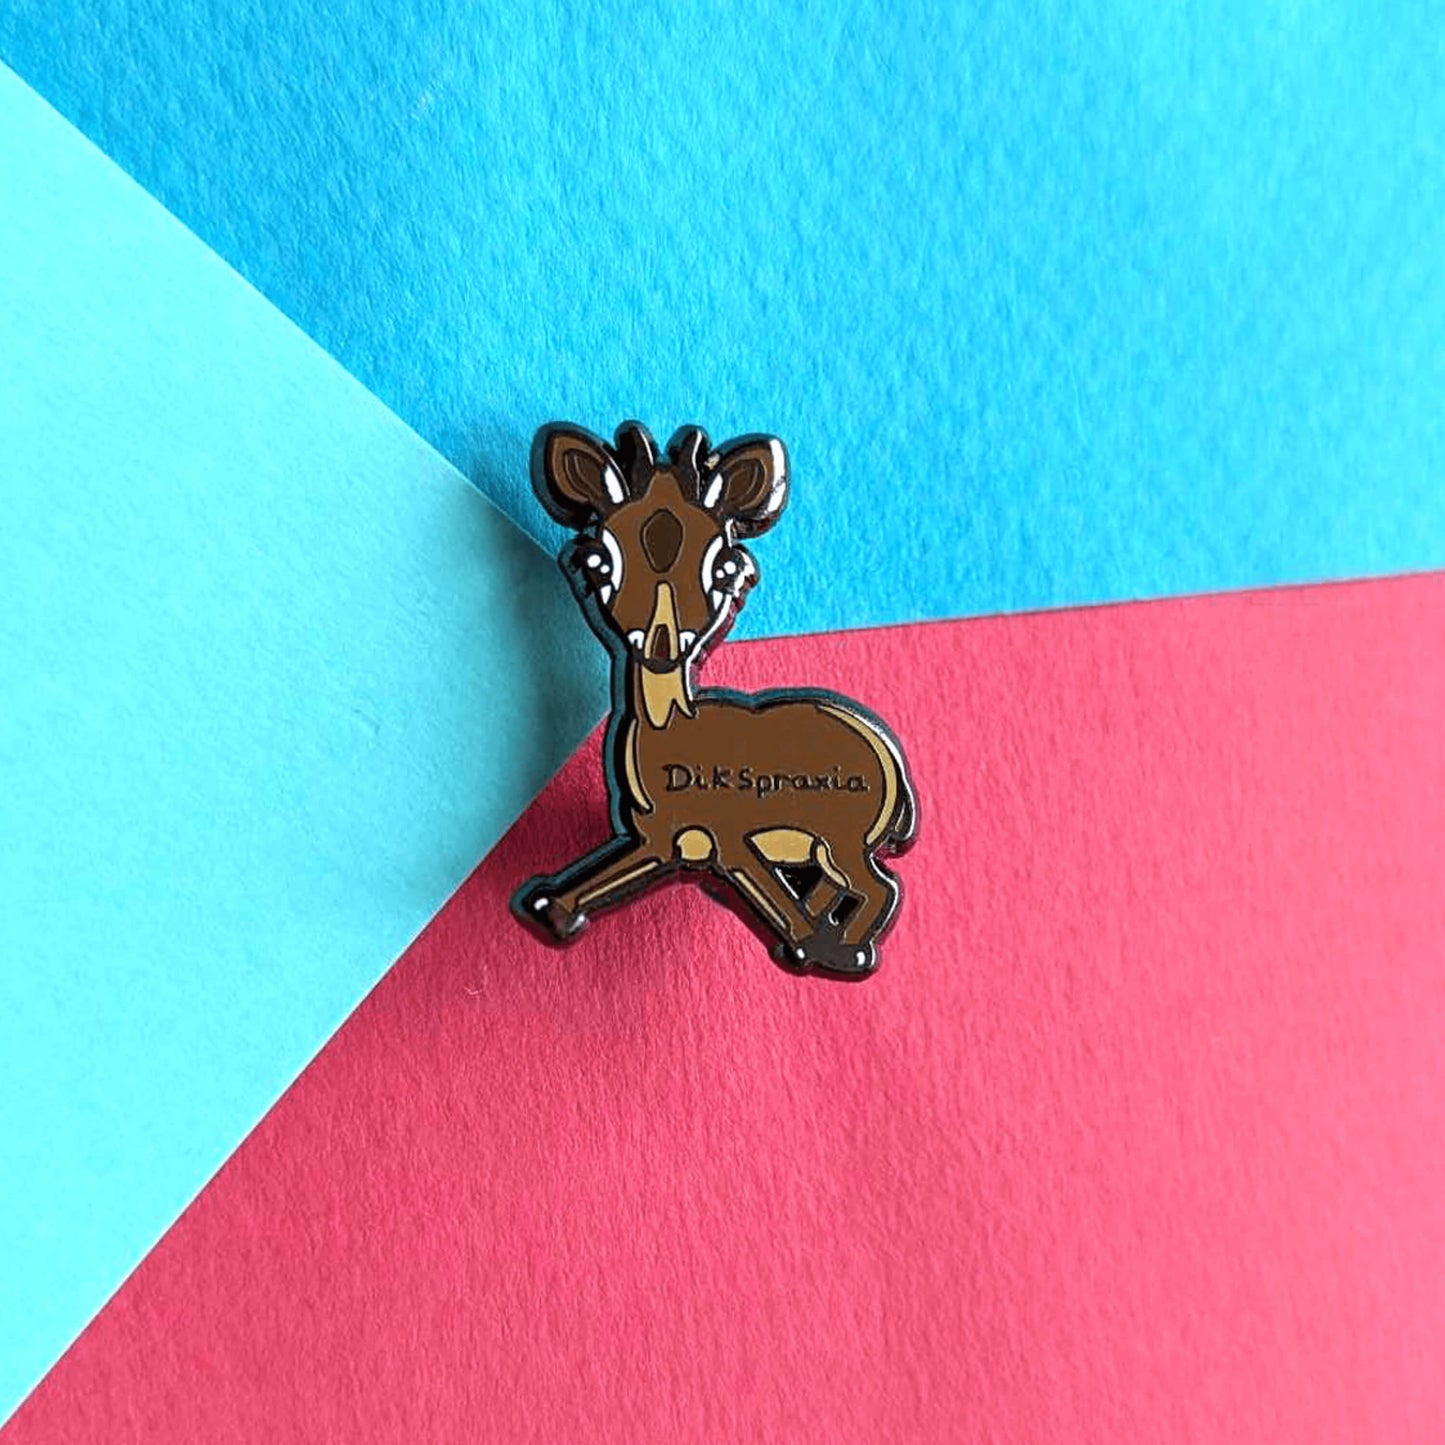 The Dikspraxia Enamel Pin - Dyspraxia on a red and blue background. The brown dik dik antelope shaped enamel pin has its two front legs splayed chaotically with black text reading 'dikspraxia' across its middle. The design is raising awareness for dyspraxia and neurodivergence.